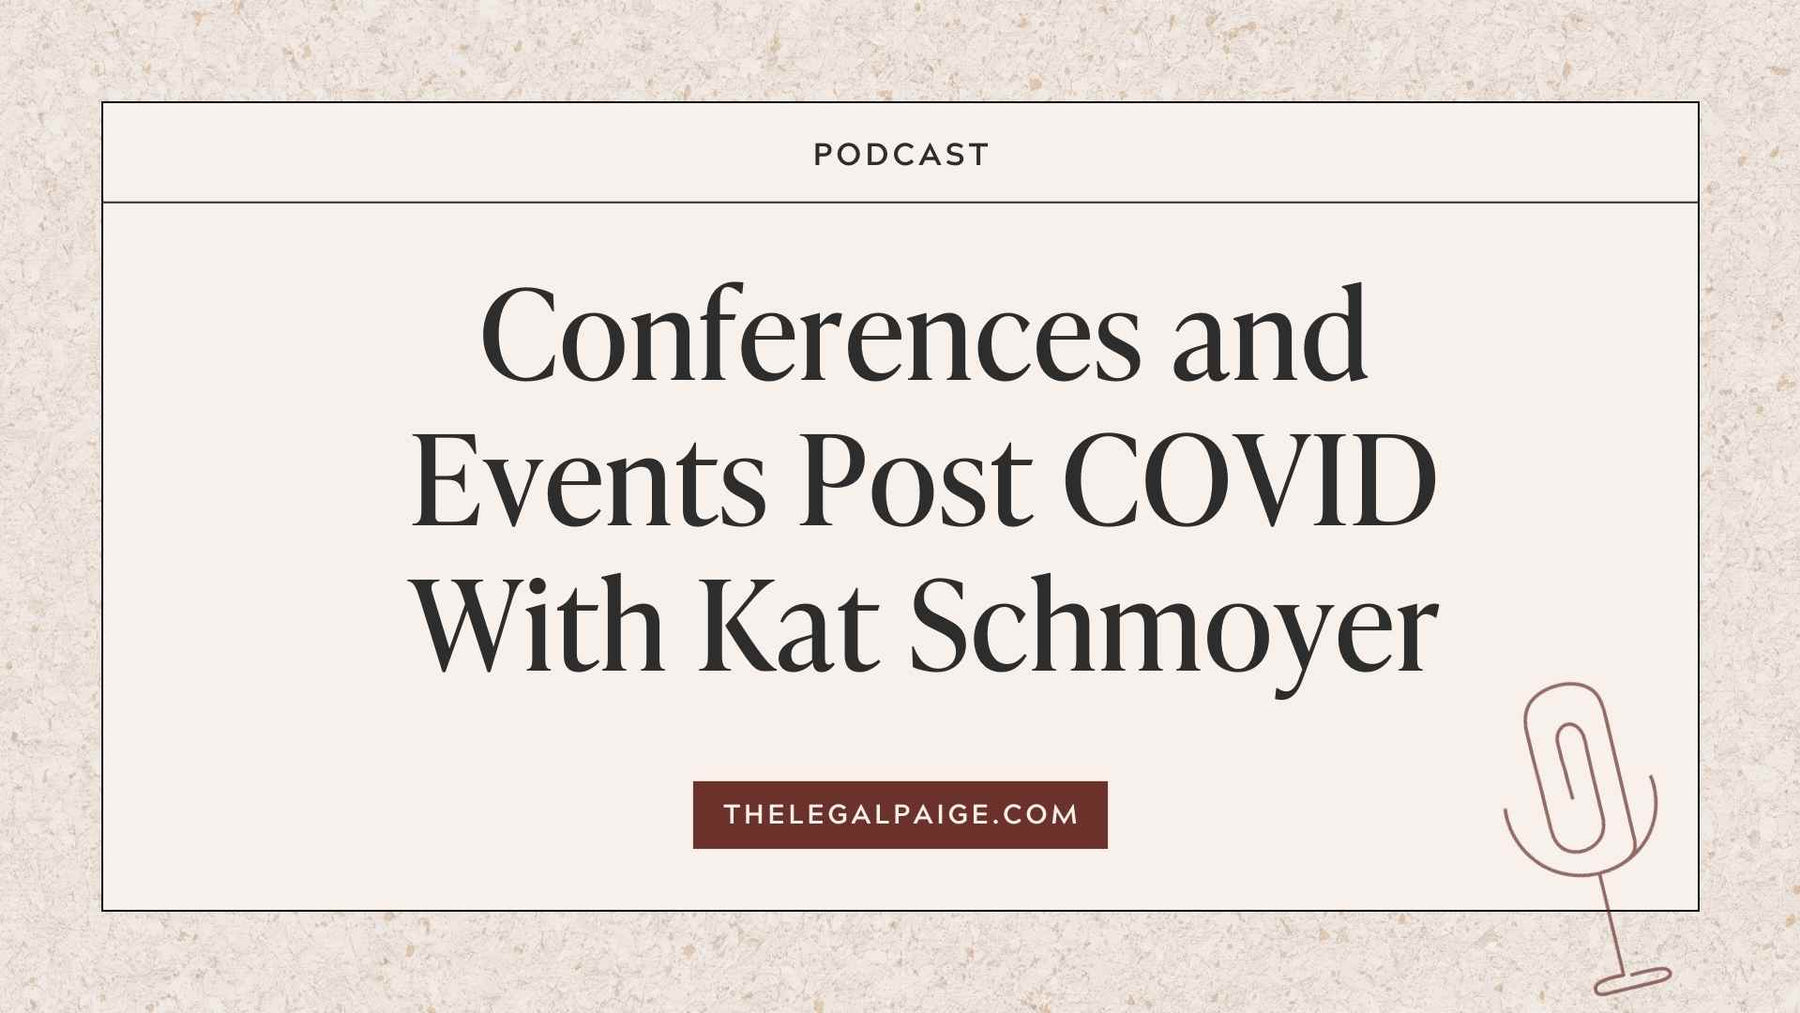 Episode 79: Conferences and Events Post COVID With Kat Schmoyer